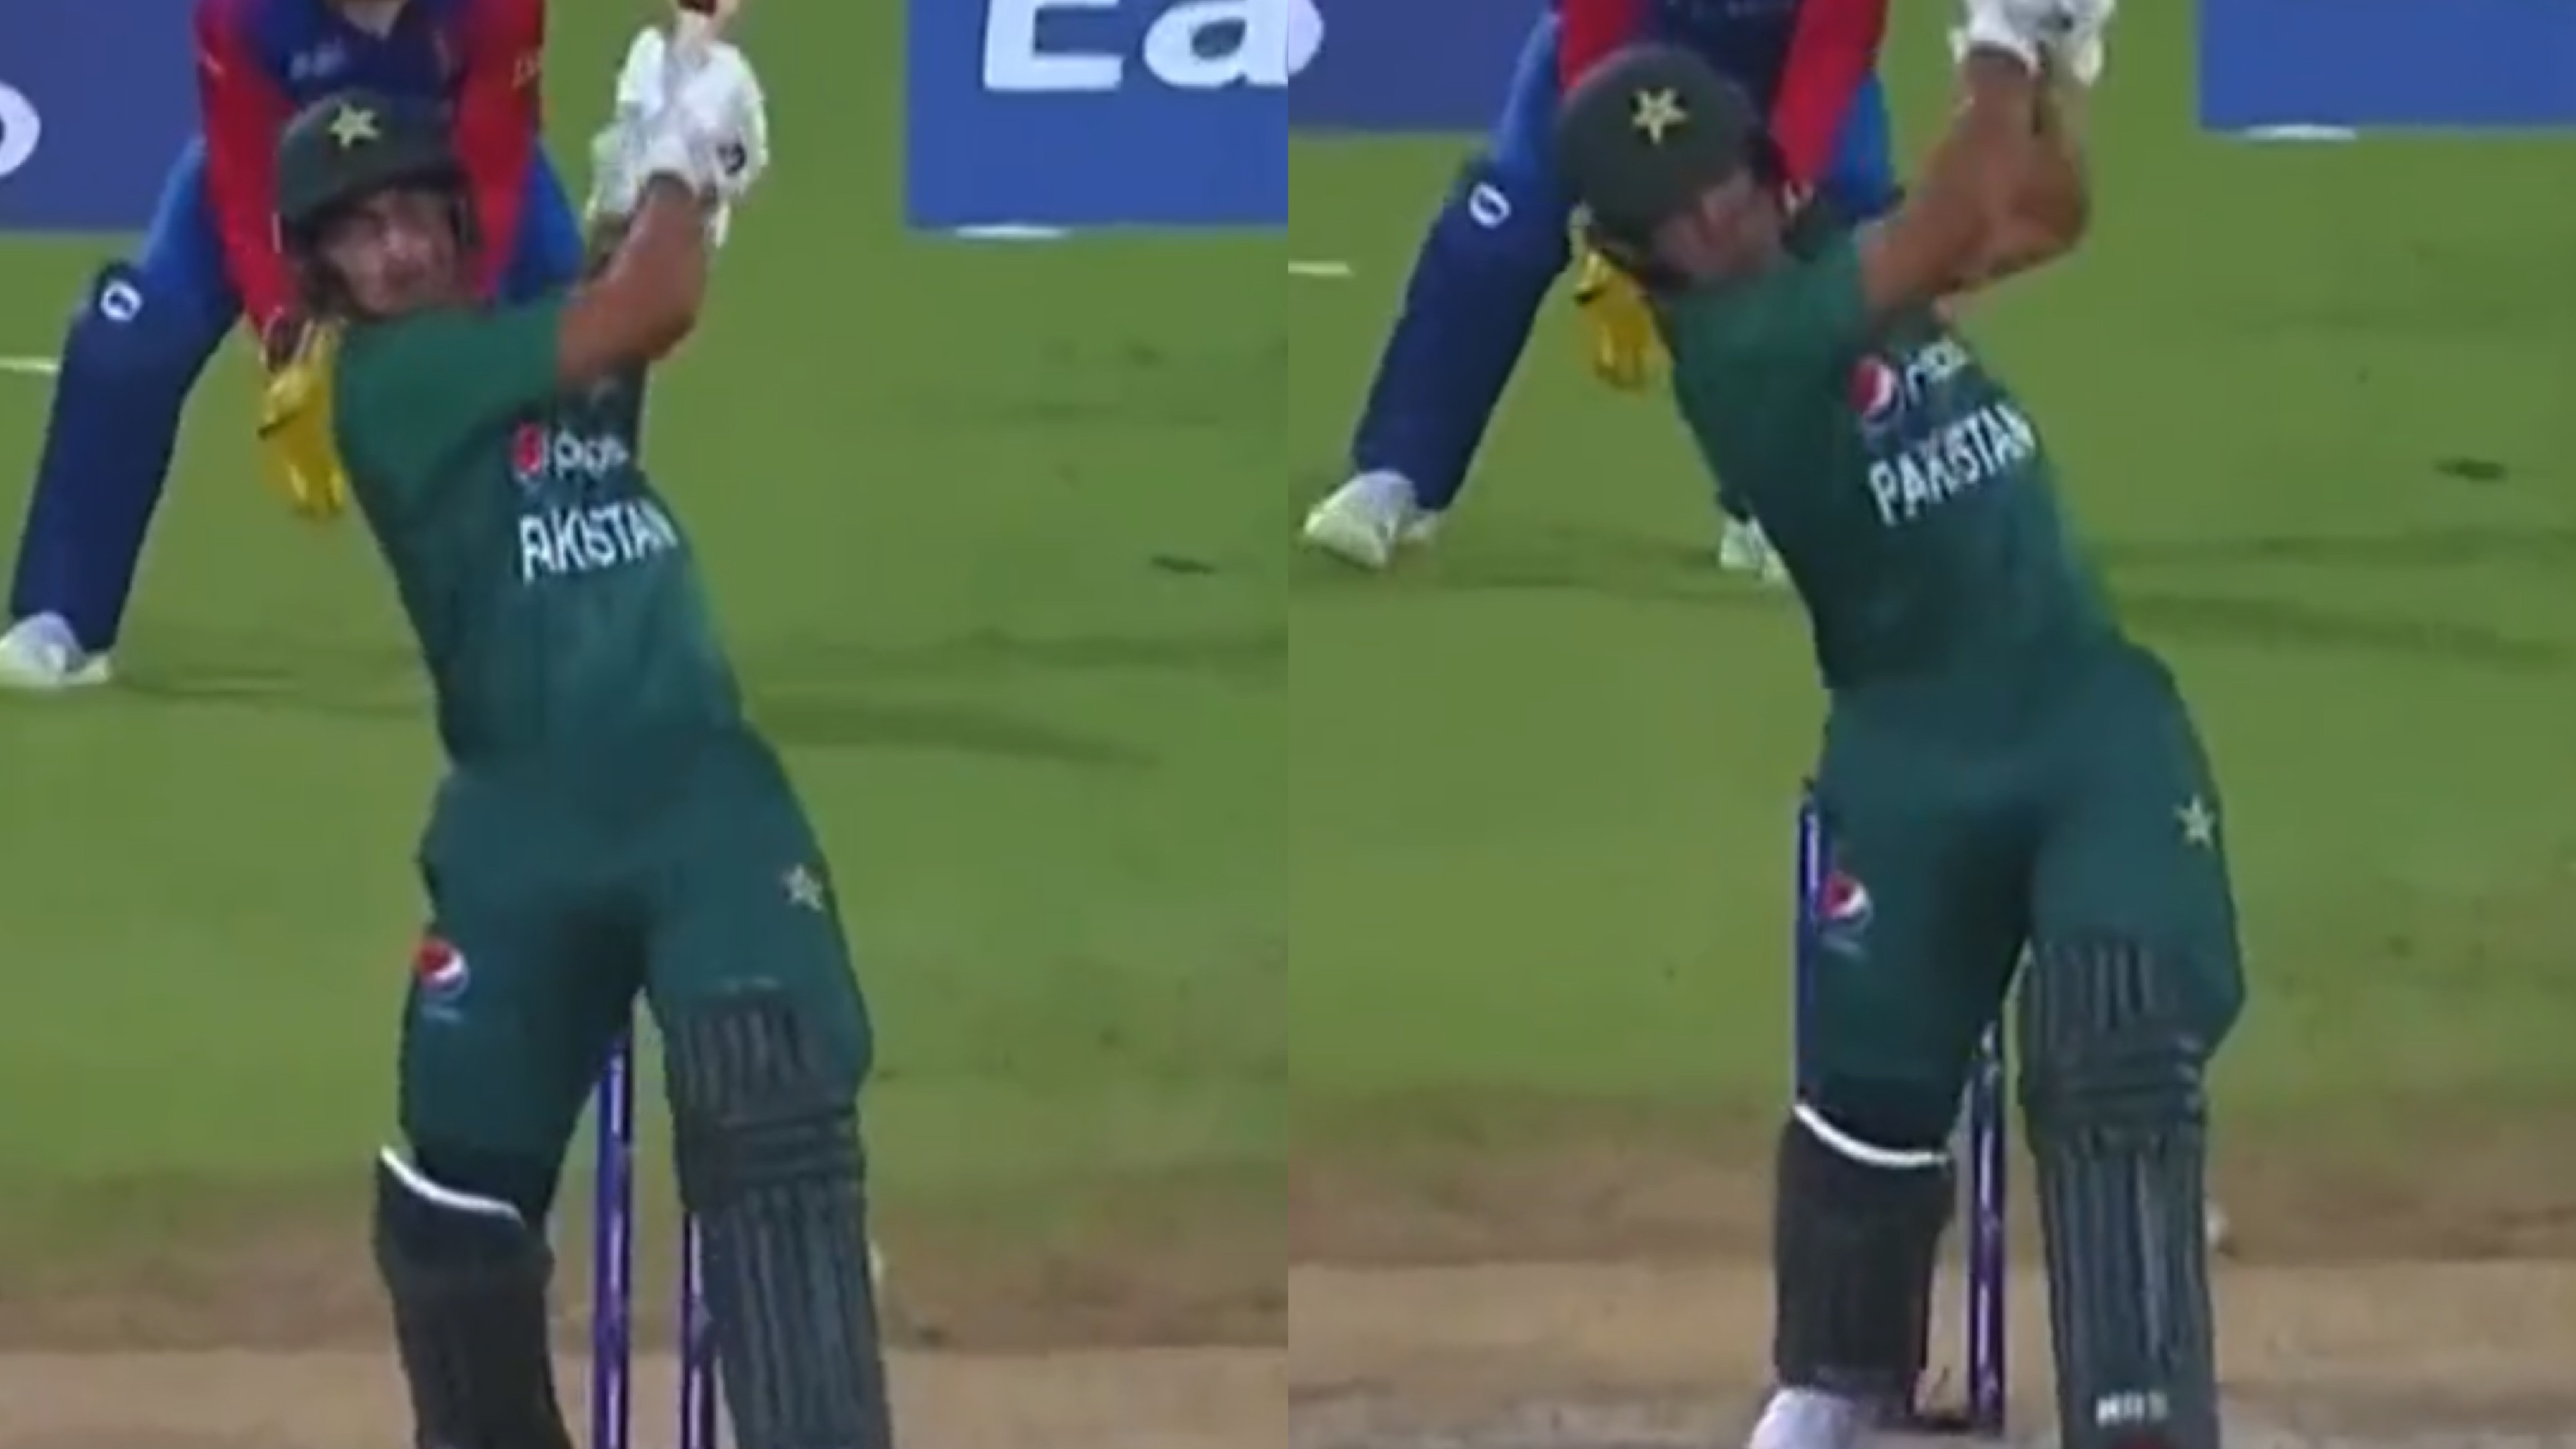 Asia Cup 2022: WATCH - Naseem Shah's successive sixes off Fazalhaq Farooqi to win the game for Pakistan